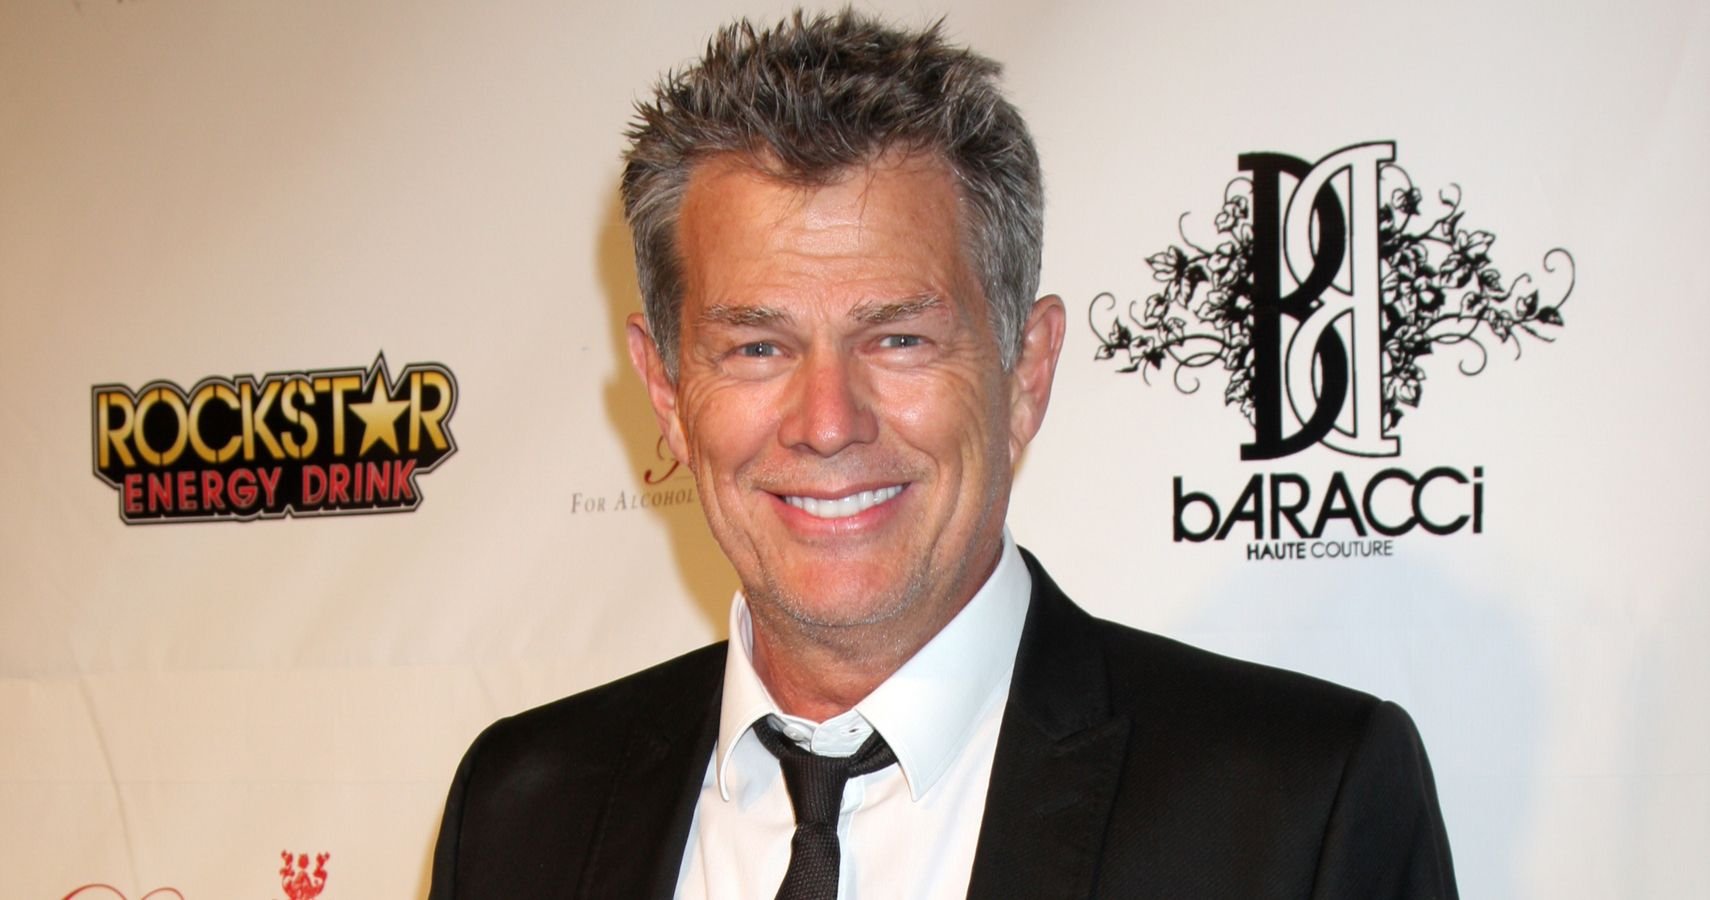 A Glance At The Exponential Rise Of David Foster's Career And Net Worth